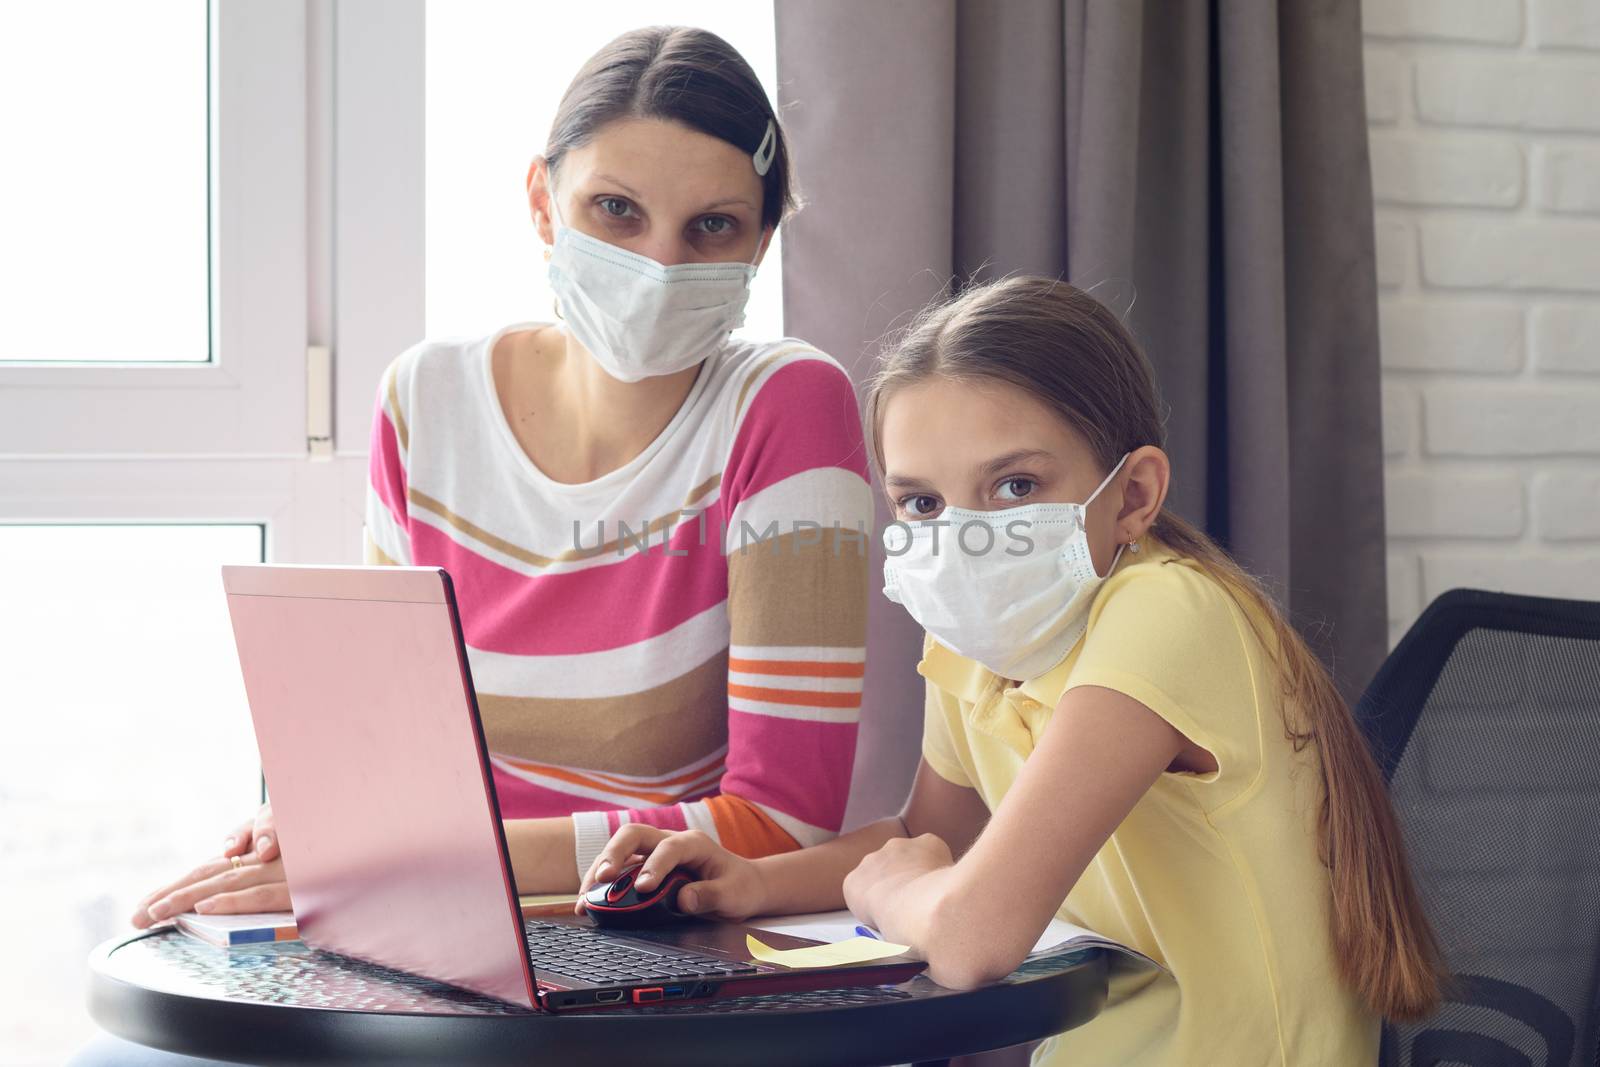 The quarantined family in the isolation ward, mom and daughter doing homework, looked into the frame